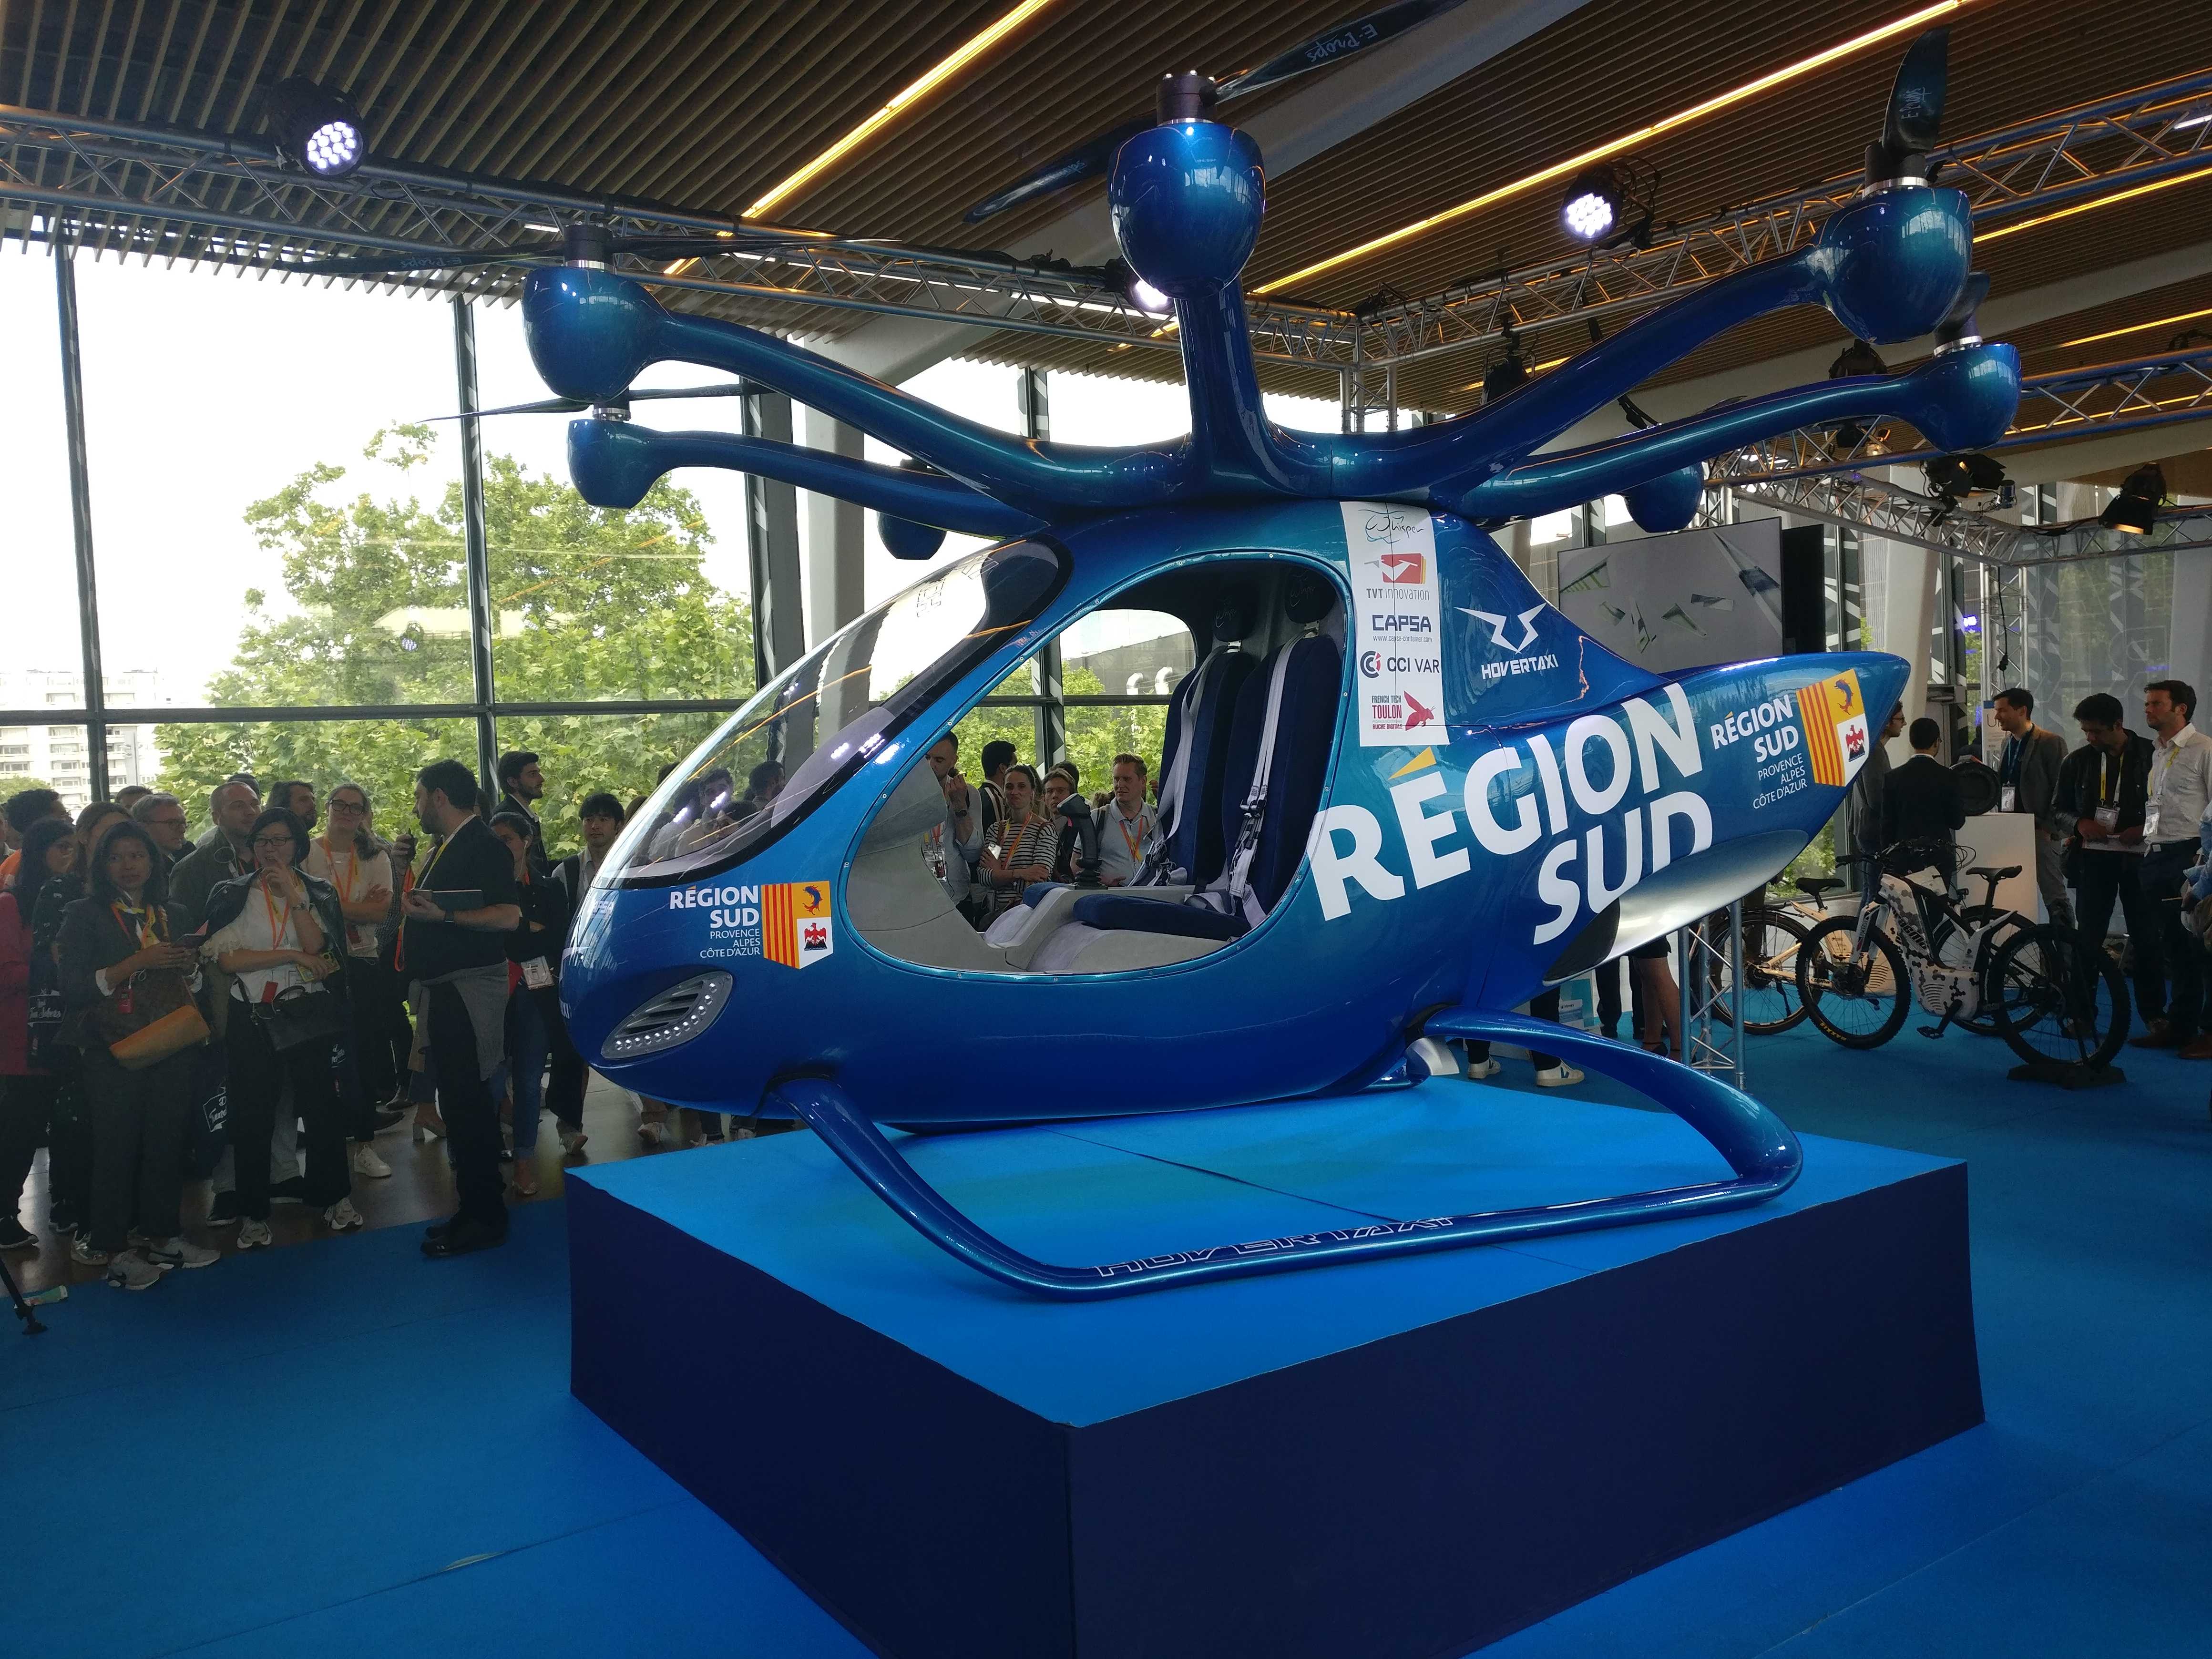 From air taxis to the Batmobile: The coolest and weirdest things at France's massive tech expo